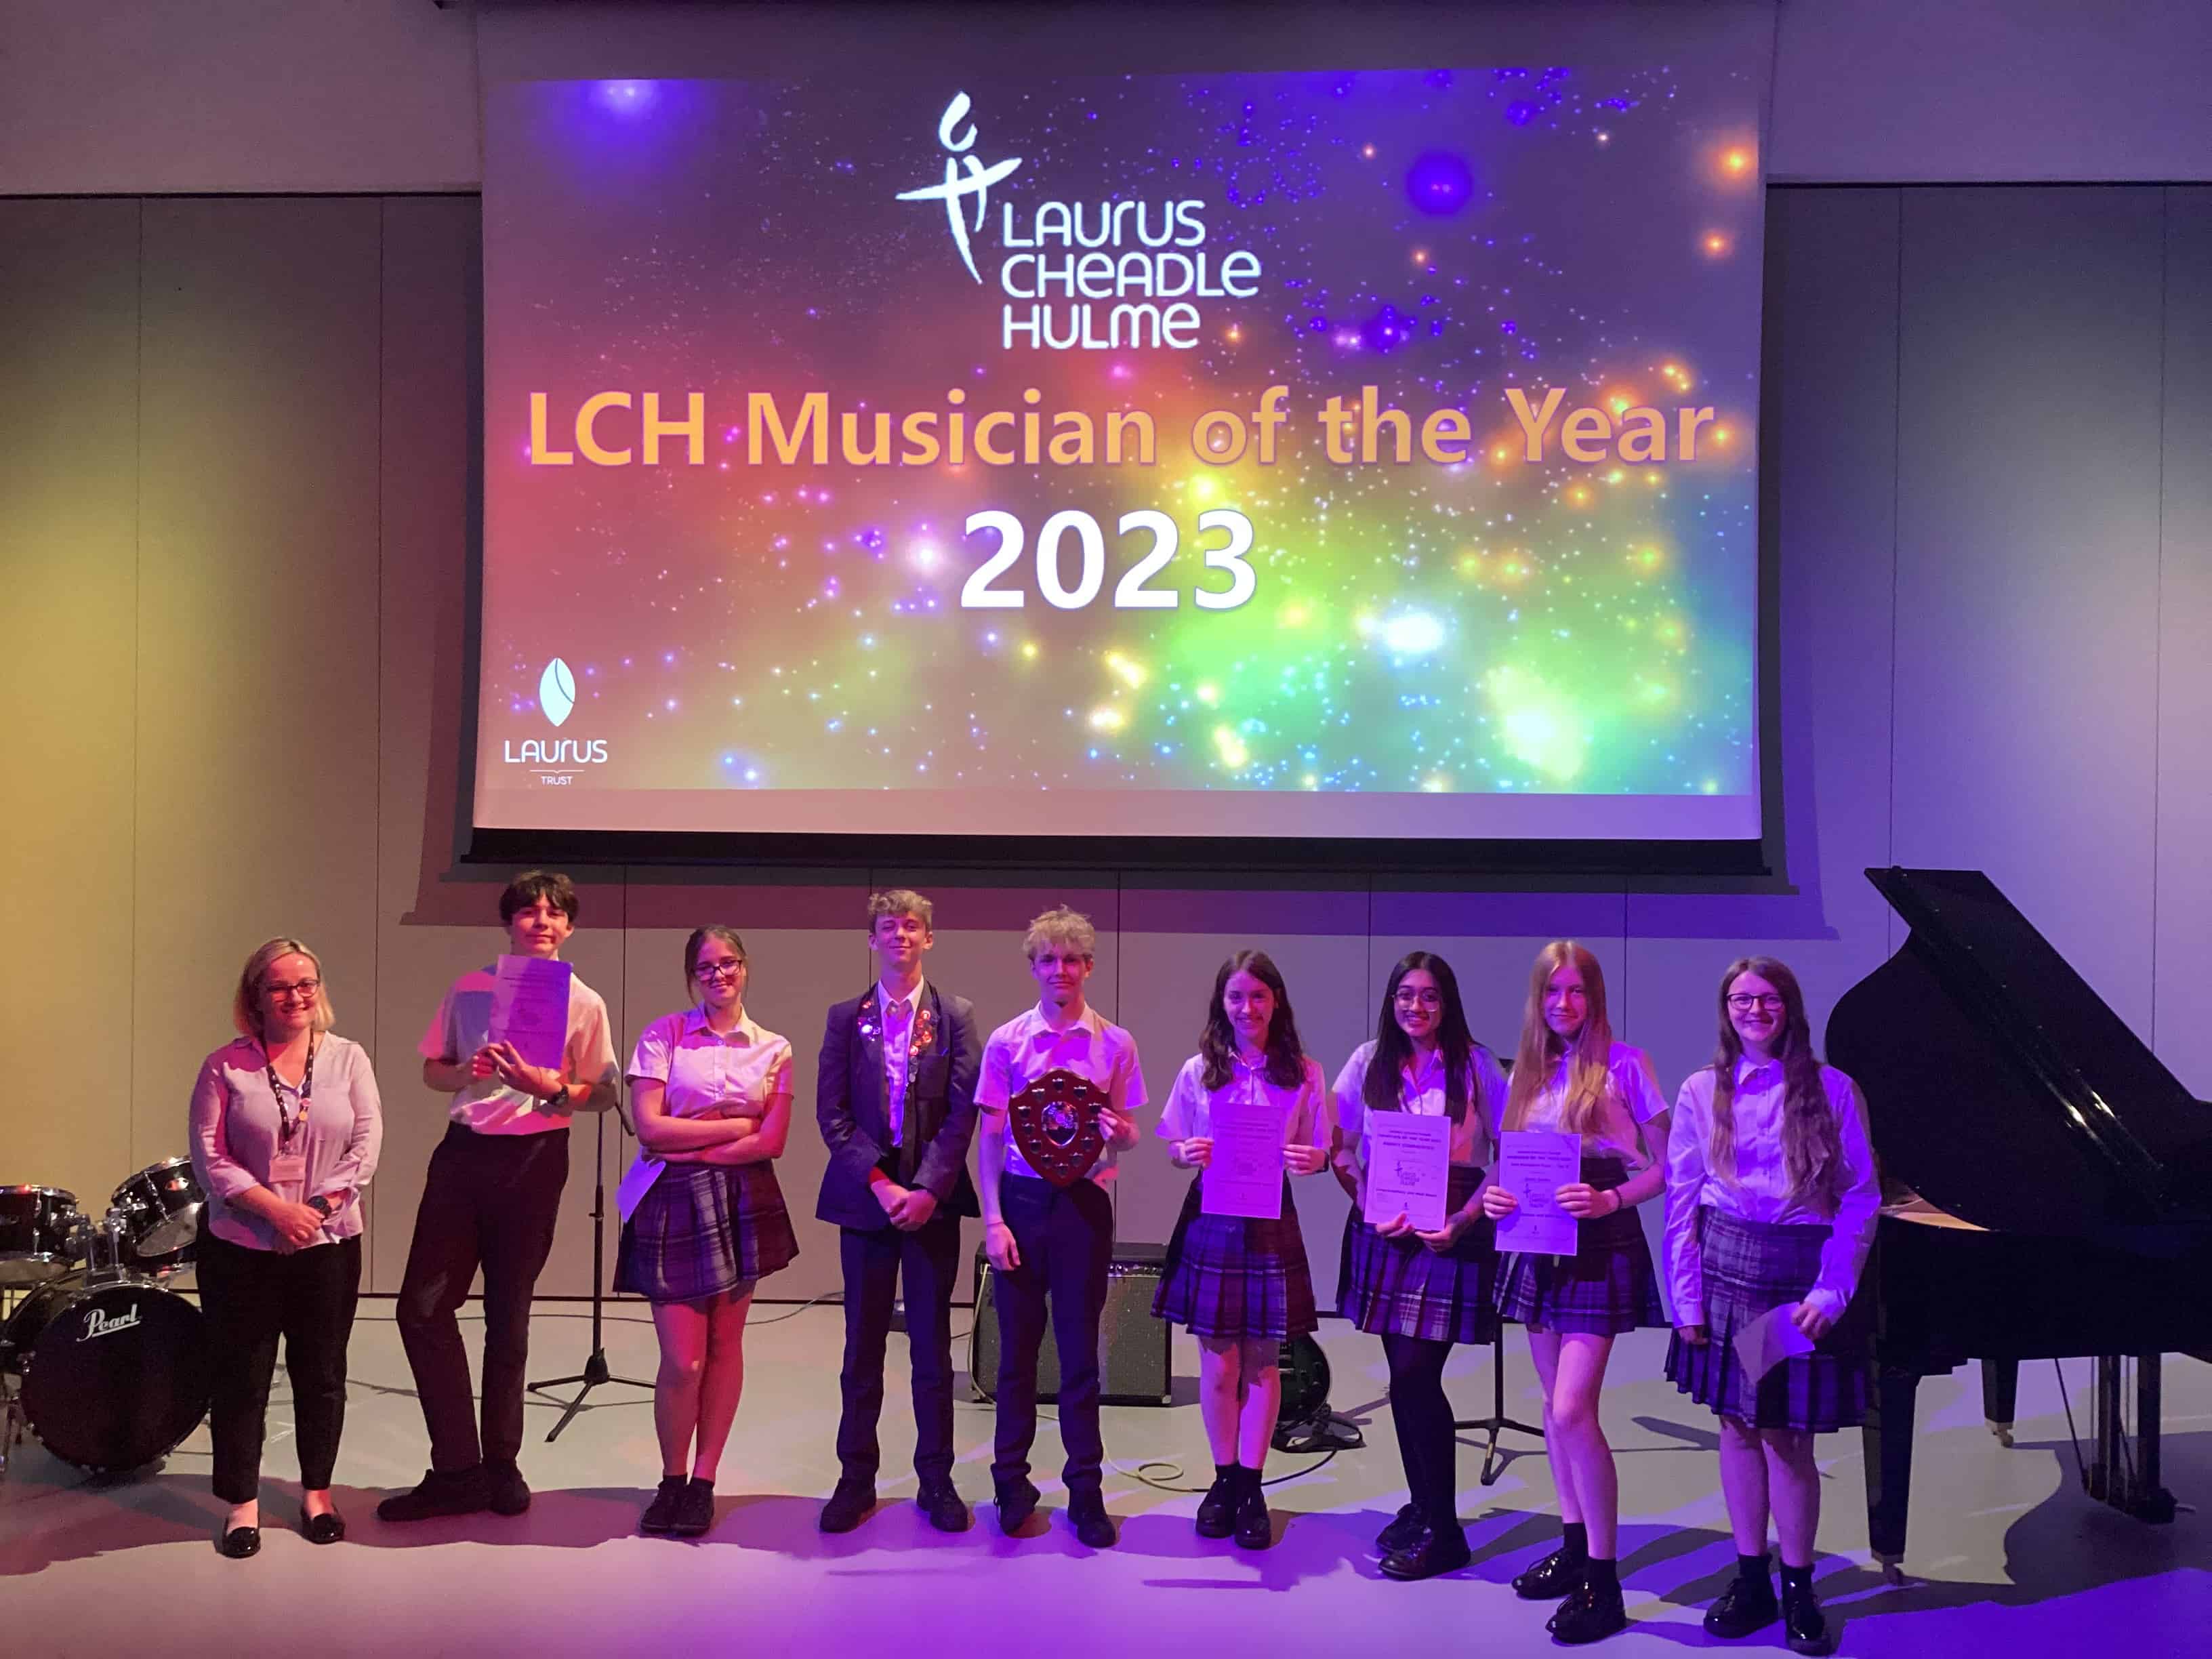 The 8 nominated performers in the Laurus Cheadle Hulme Musician of the Year competition 2023 stand next to Miss Brown (Trust Director of Music) on the stage in purple lighting.